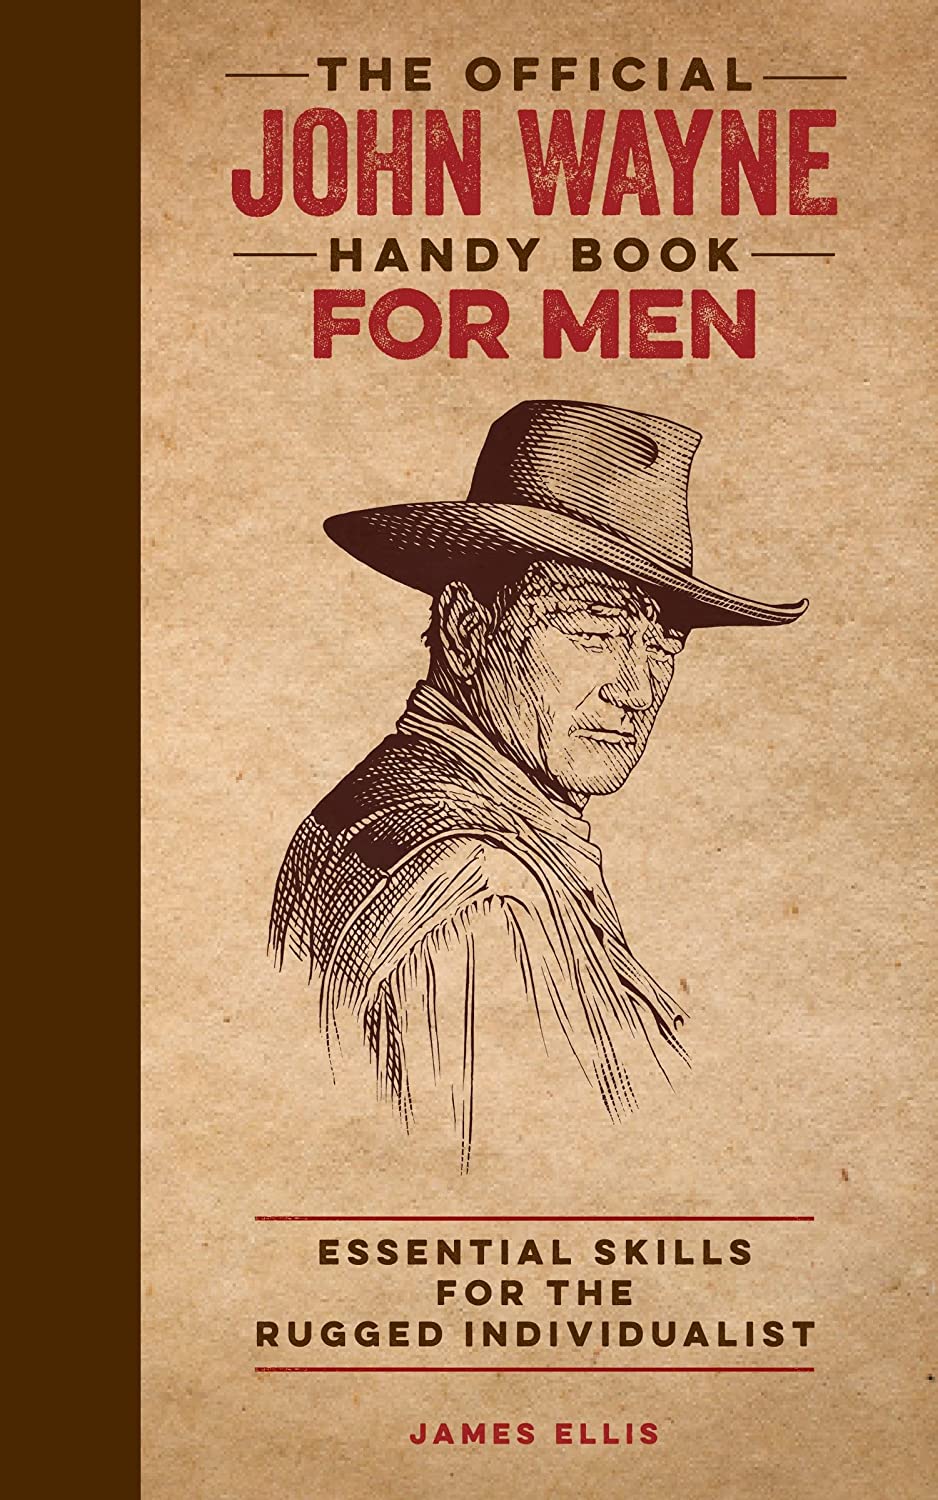 The Official John Wayne Handy Book for Men: Essential Skills for the Rugged Individualist (Official John Wayne Handy Book Series)